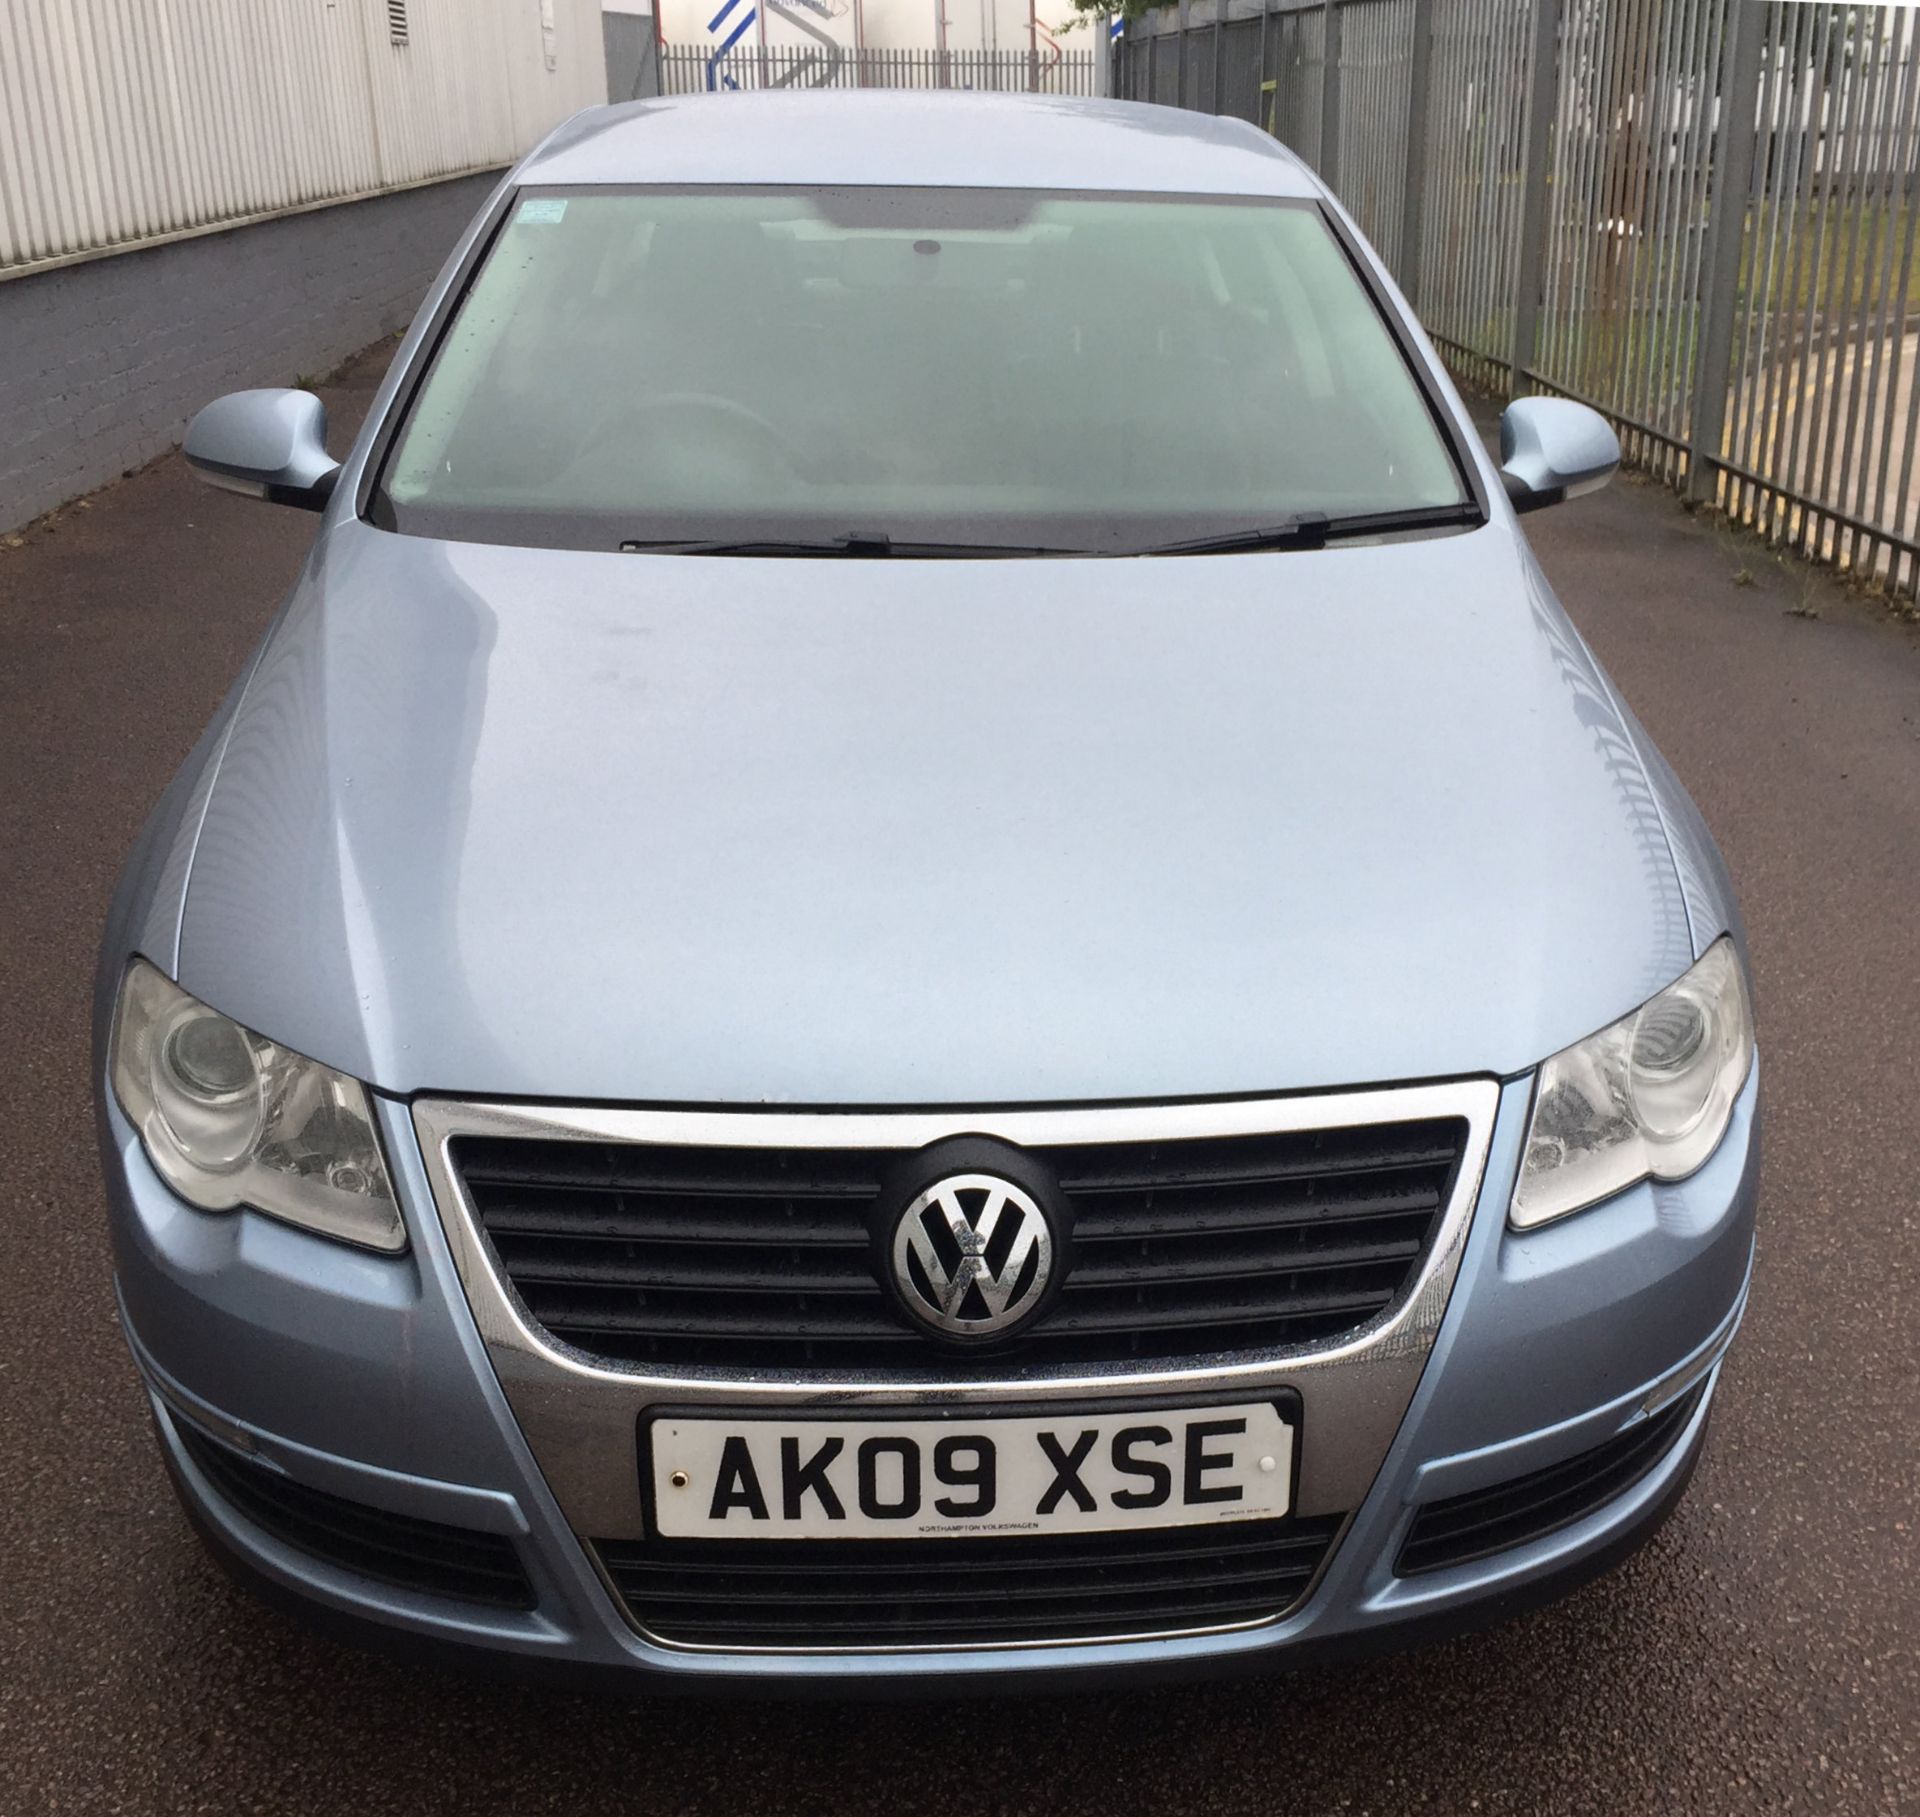 2009 Volkswagen Passat 2.0 TDI Highline 4Dr Saloon - CL505 - NO VAT ON THE HAMMER - Location: Corby, - Image 3 of 14